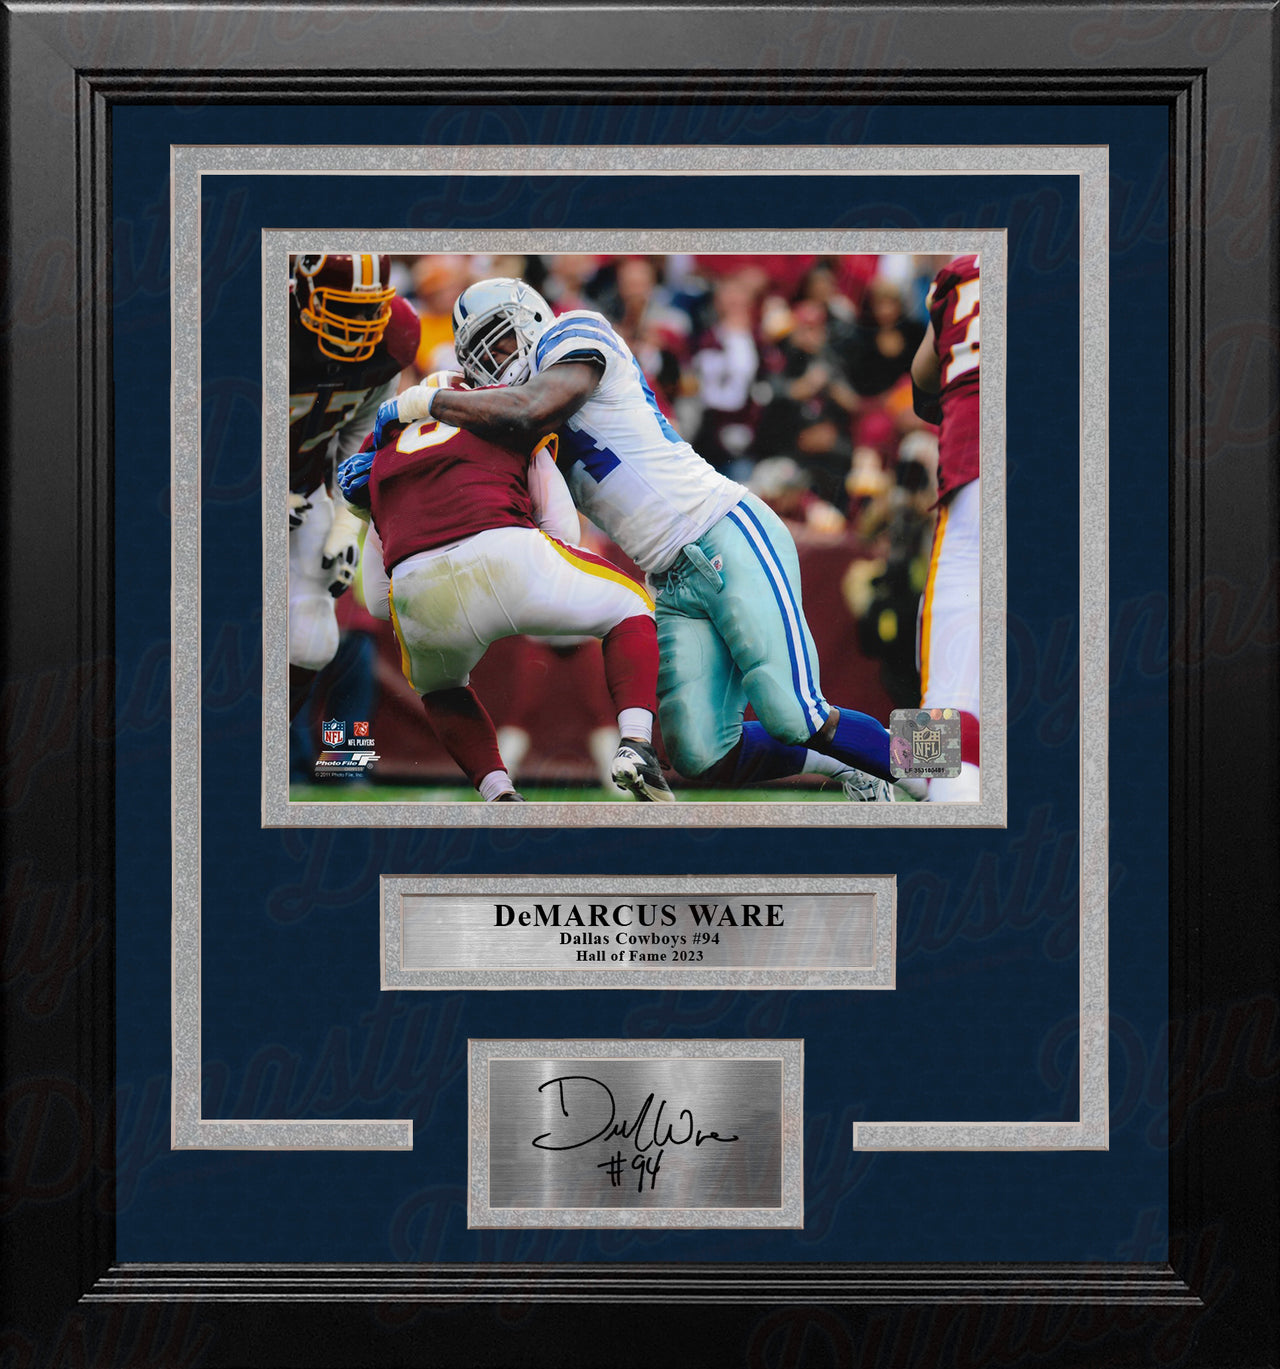 DeMarcus Ware Tackling Action Dallas Cowboys 8" x 10" Framed Football Photo with Engraved Autograph